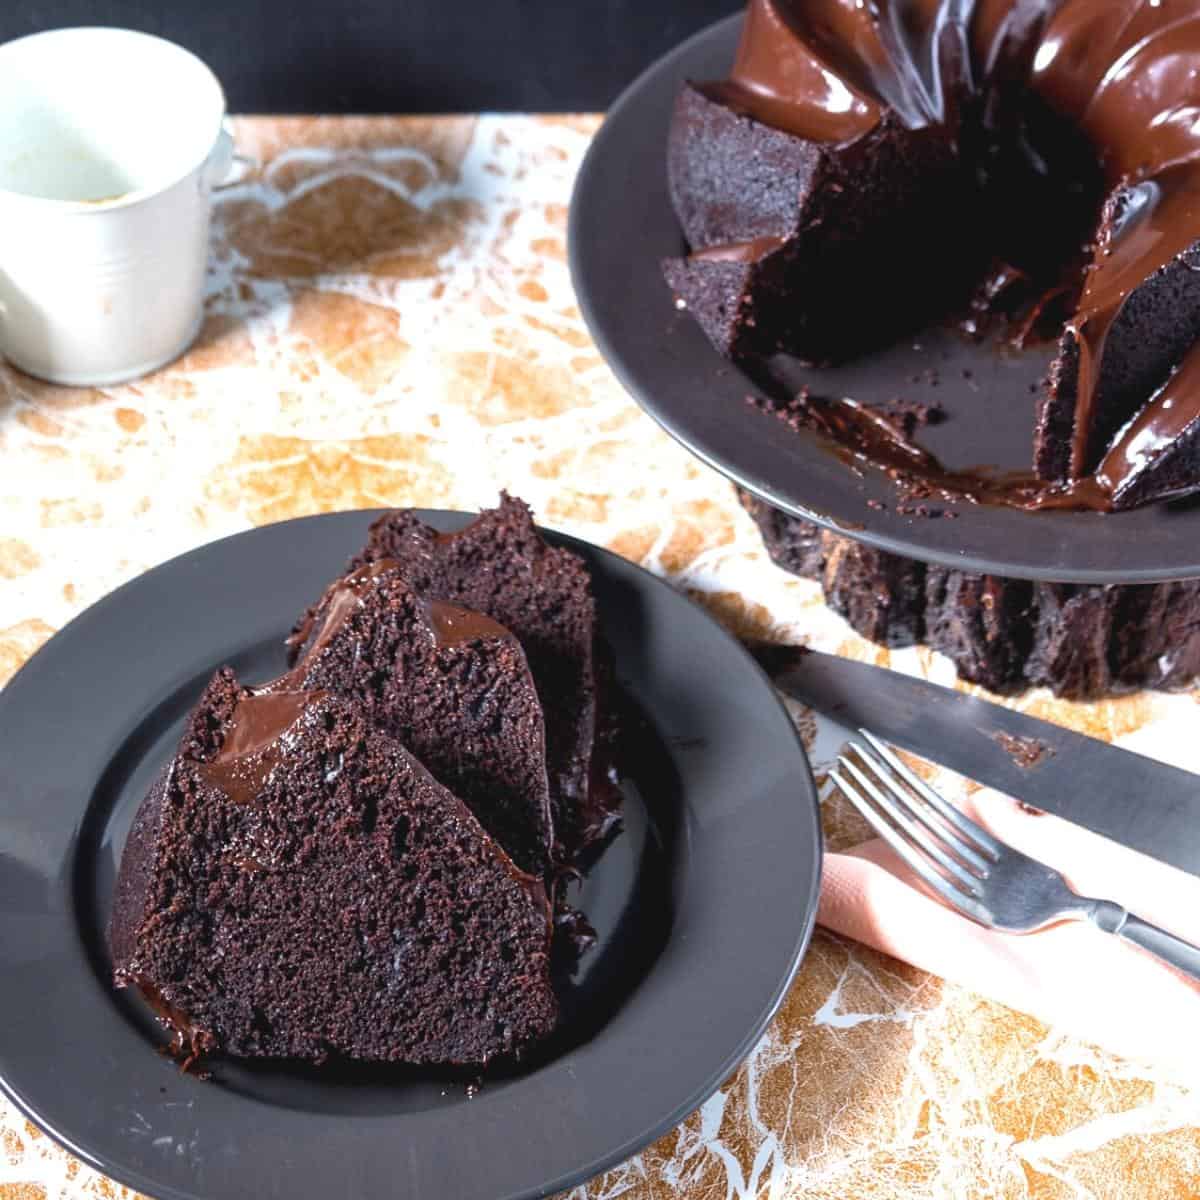 Slices of chocolate cake